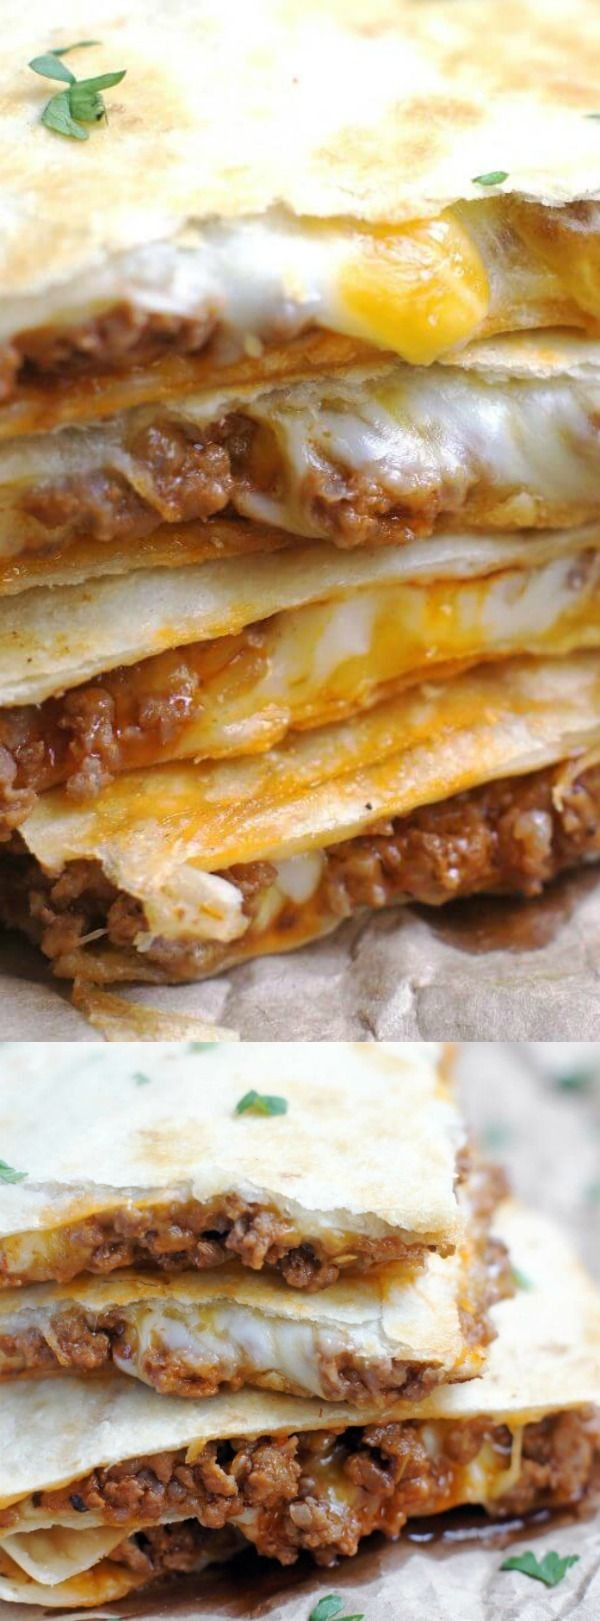 Ground Beef Quesadilla
 These Cheesy Ground Beef Quesadillas from 5 Boys Baker are